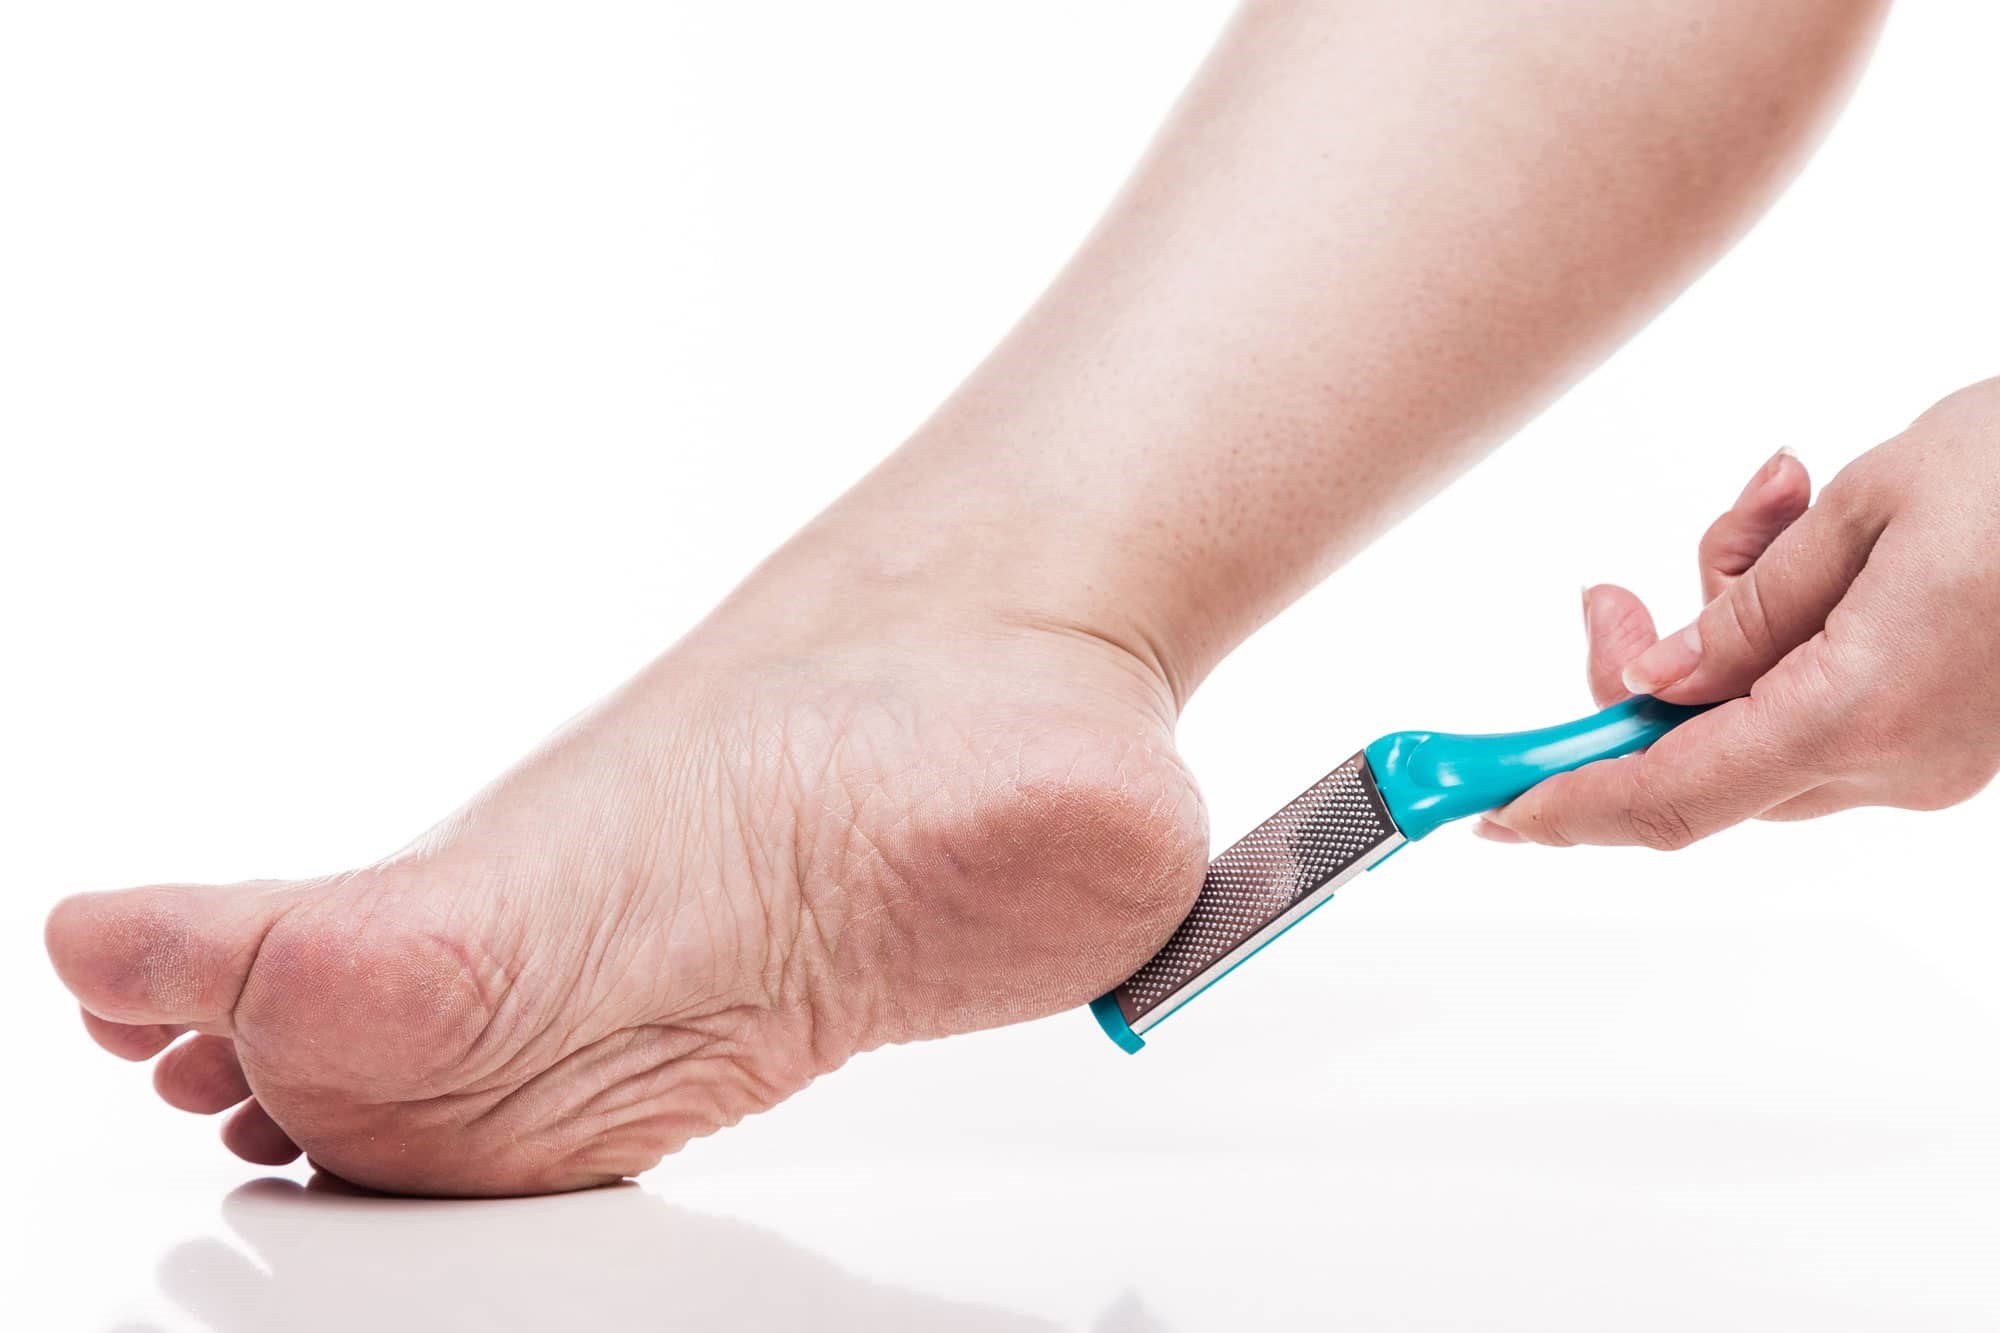 Say Goodbye To Foot Calluses With The Ultimate DIY Remover!